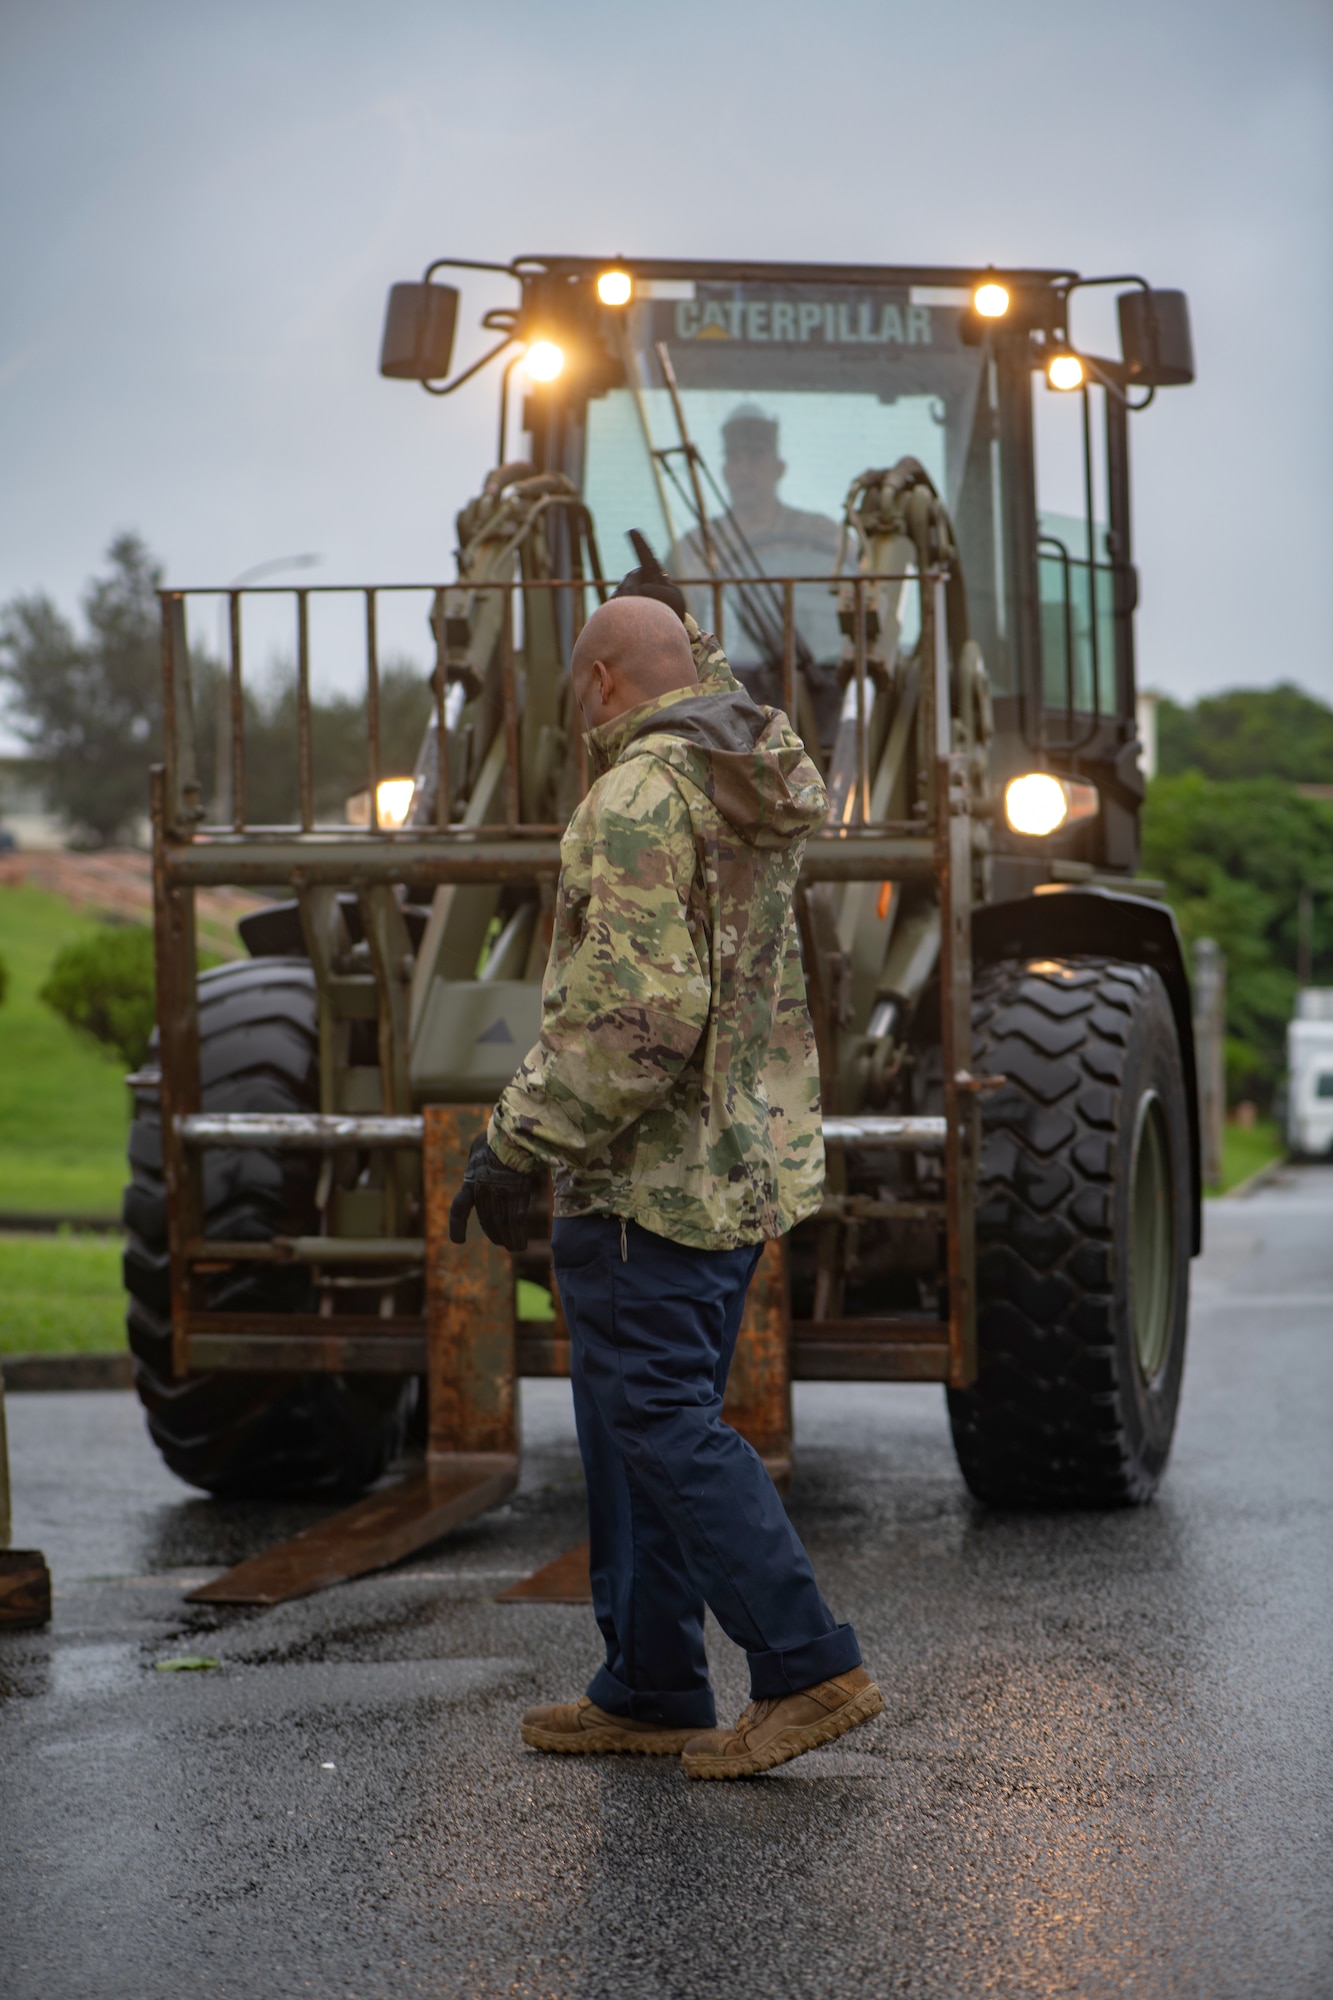 U.S. Air Force Tech. Sgt. Jerome Fontenot, 18th Wing Agile Combat Employment Office NCO in charge, directs a forklift to pick up cinder blocks used for securing tents at Kadena Air Base, Japan, July 23, 2021. Fontenot participated in Pacific Iron by offering experience and knowledge from the ACE office. Pacific Iron is a U.S. Pacific Air Forces dynamic force employment operation to project forces into the USINDOPACOM’s area of responsibility in support of the 2018 National Defense Strategy which called on the military to be a more lethal, adaptive, and resilient force.(U.S. Air Force photo by Airman 1st Class Moses Taylor)